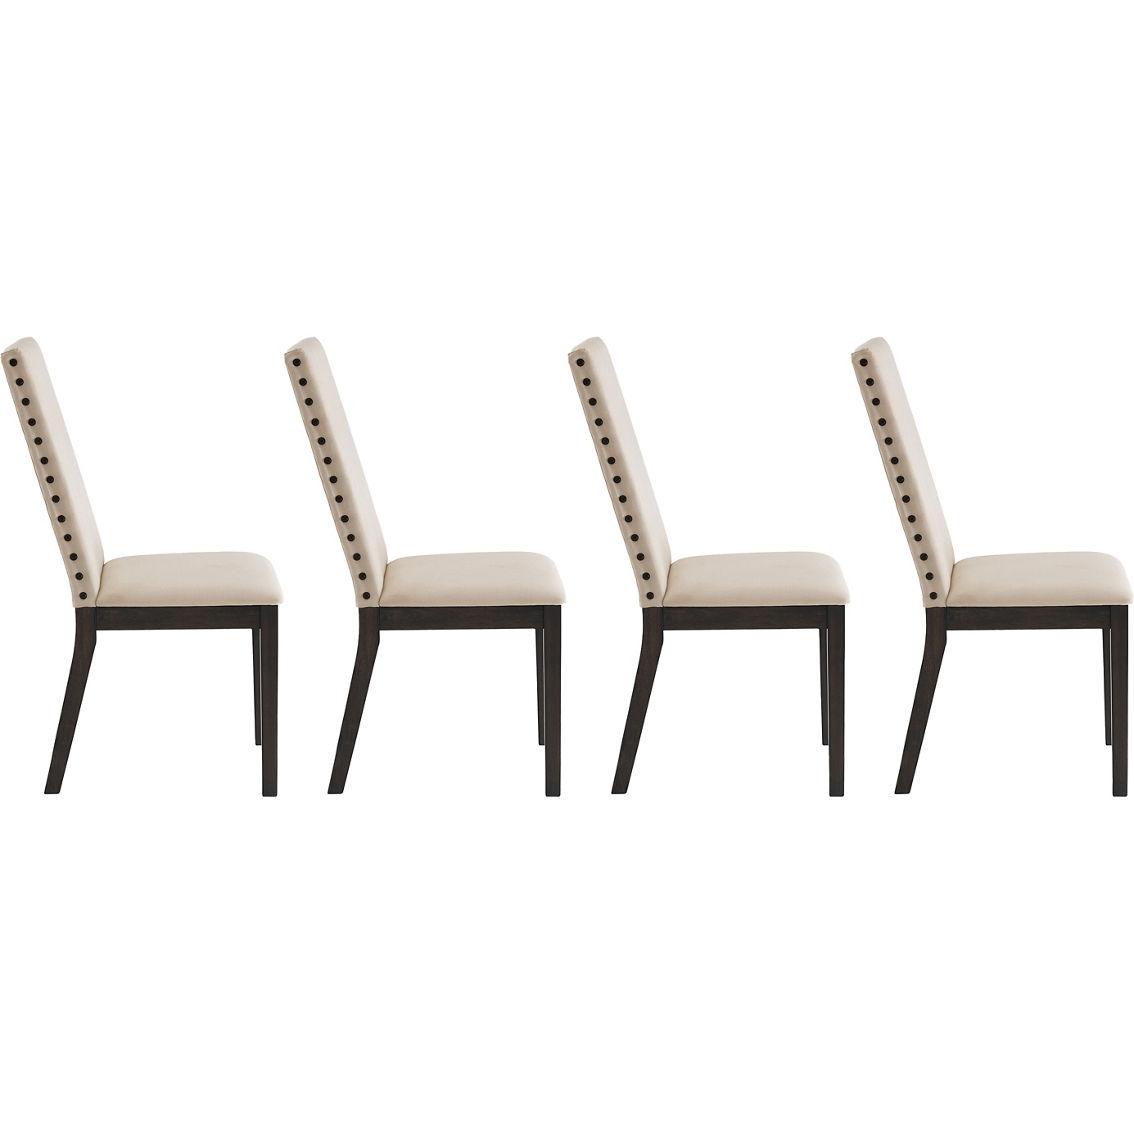 Crosley Furniture Hayden Upholstered Dining Chair 4 pk. - Image 3 of 3